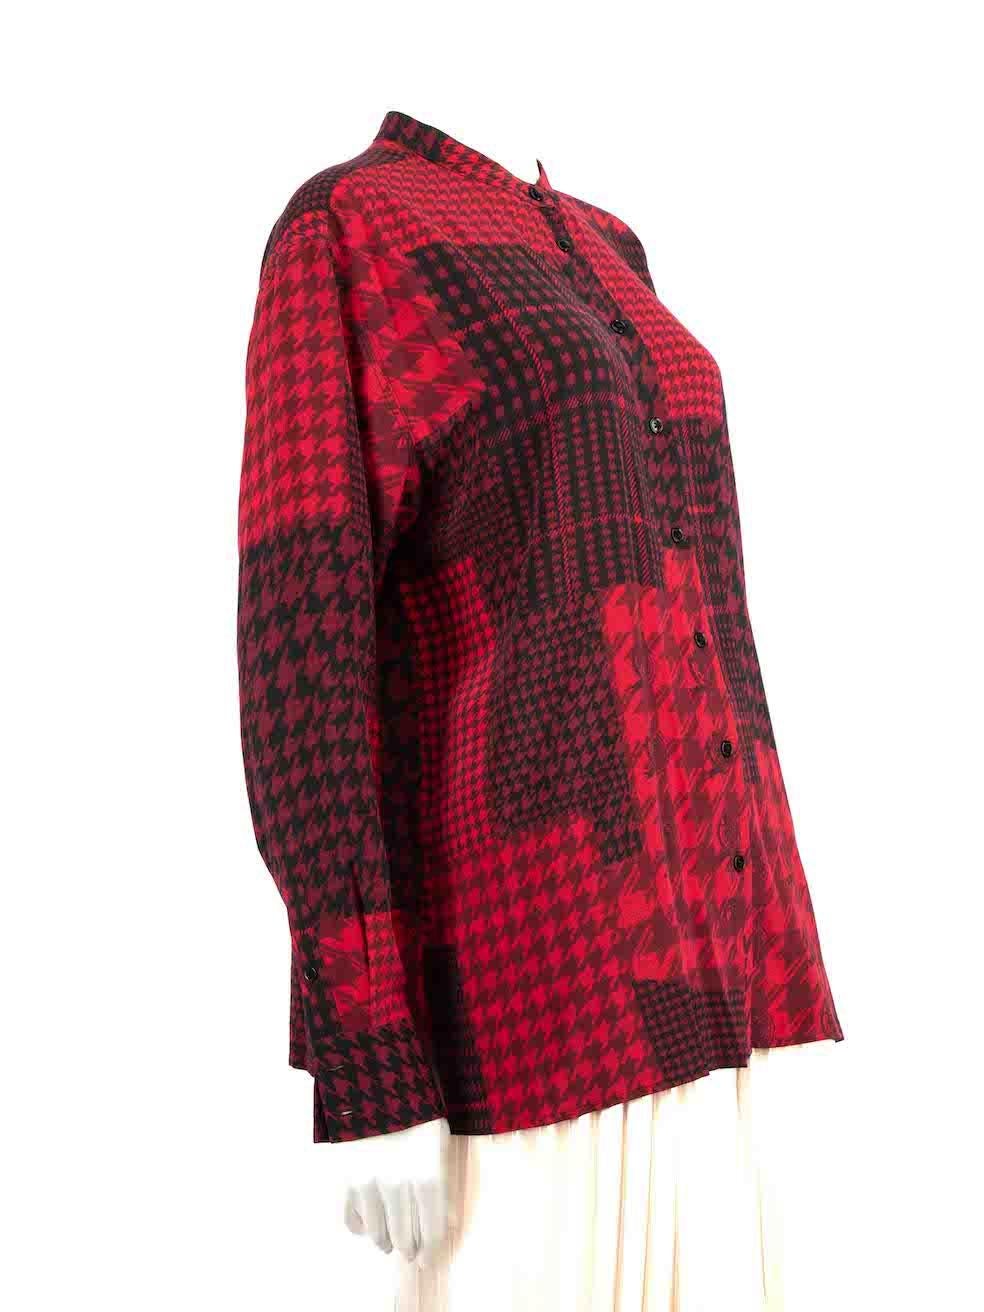 CONDITION is Very good. Hardly any visible wear to shirt is evident. Care label has been removed on this used Tommy Hilfiger designer resale item.
 
 Details
 Red
 Synthetic
 Shirt
 Houndstooth pattern
 Long sleeves
 Button up fastening
 Buttoned